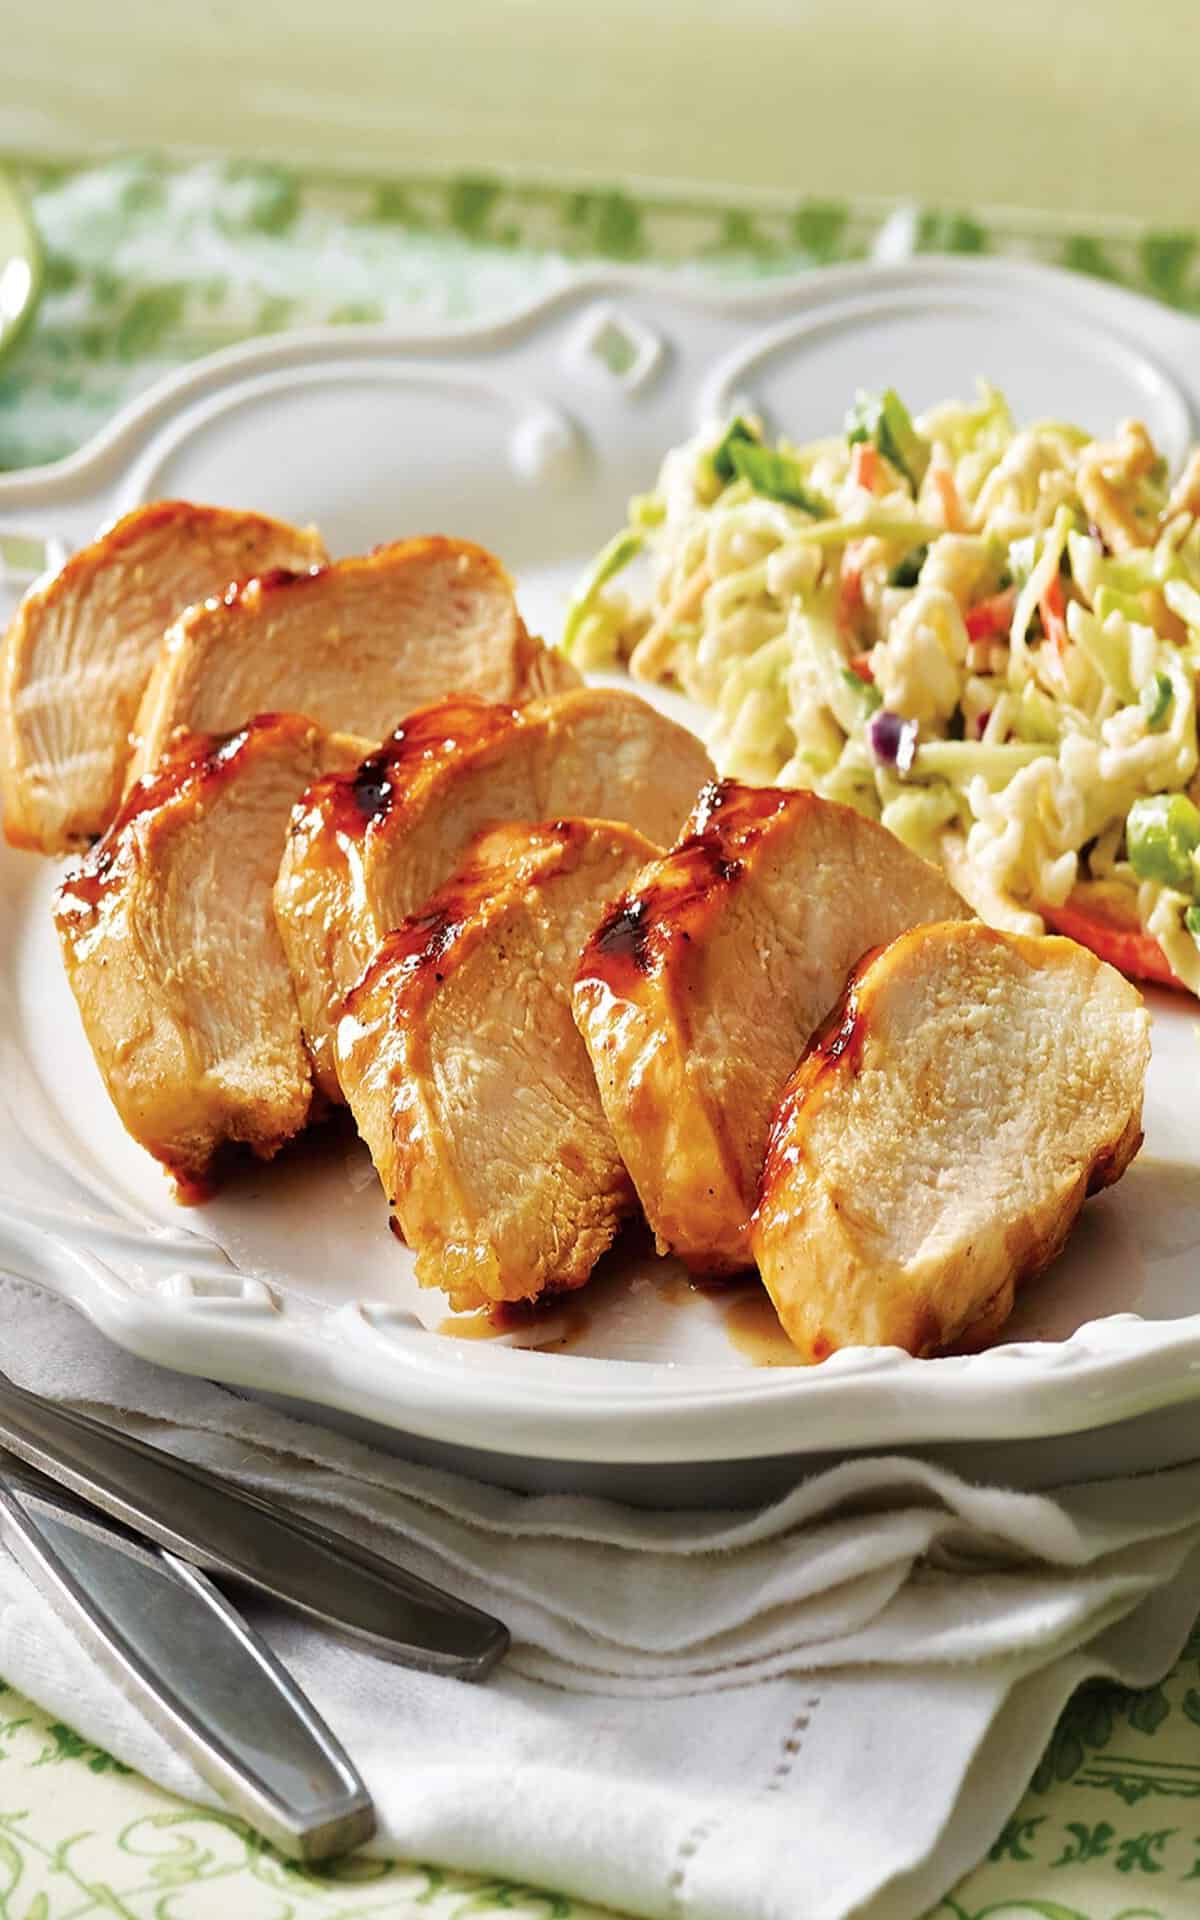 Caramel Hickory Chicken With Crunchy Asian Slaw